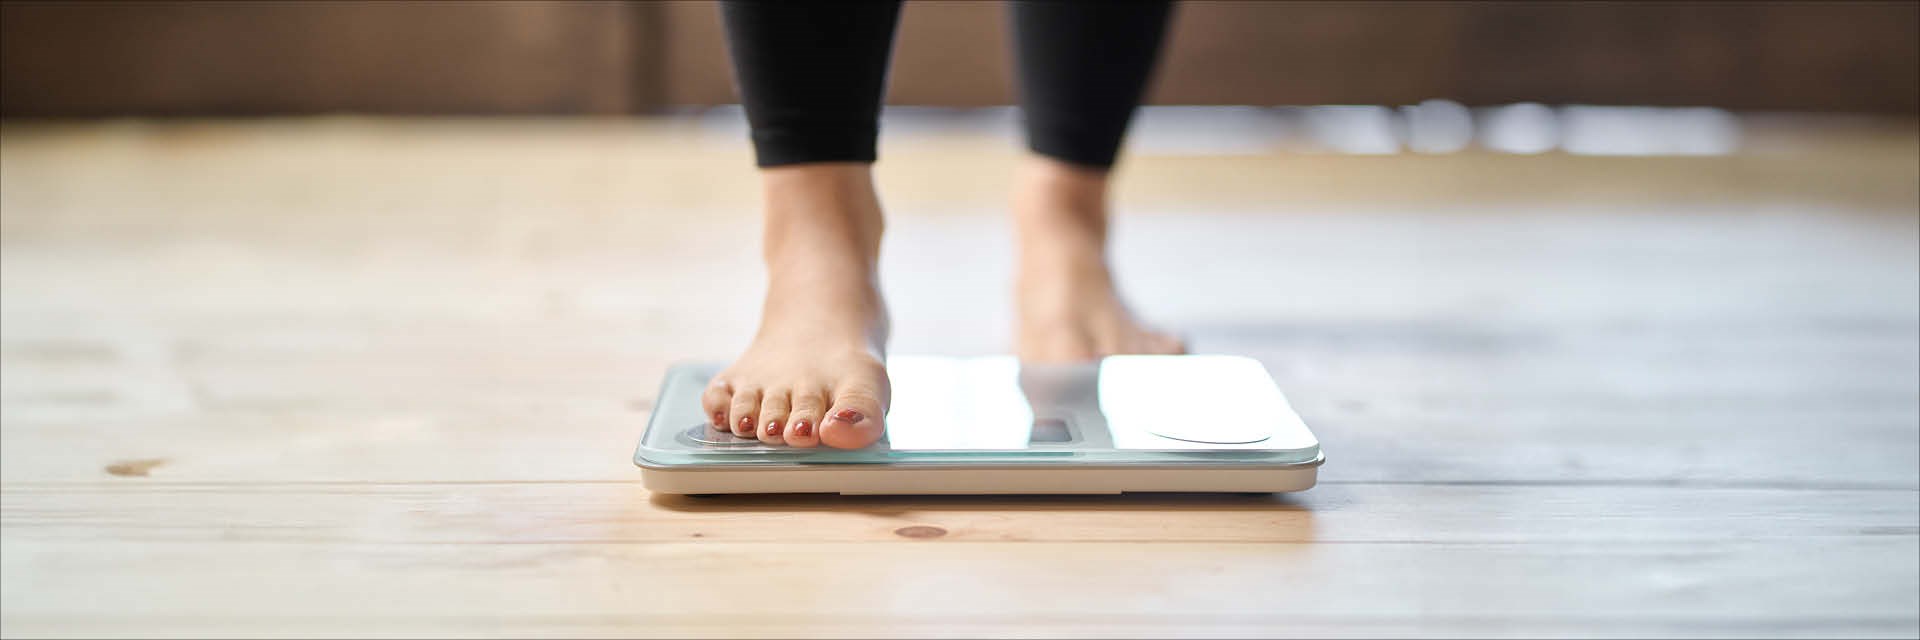 Barefoot person stepping onto scales